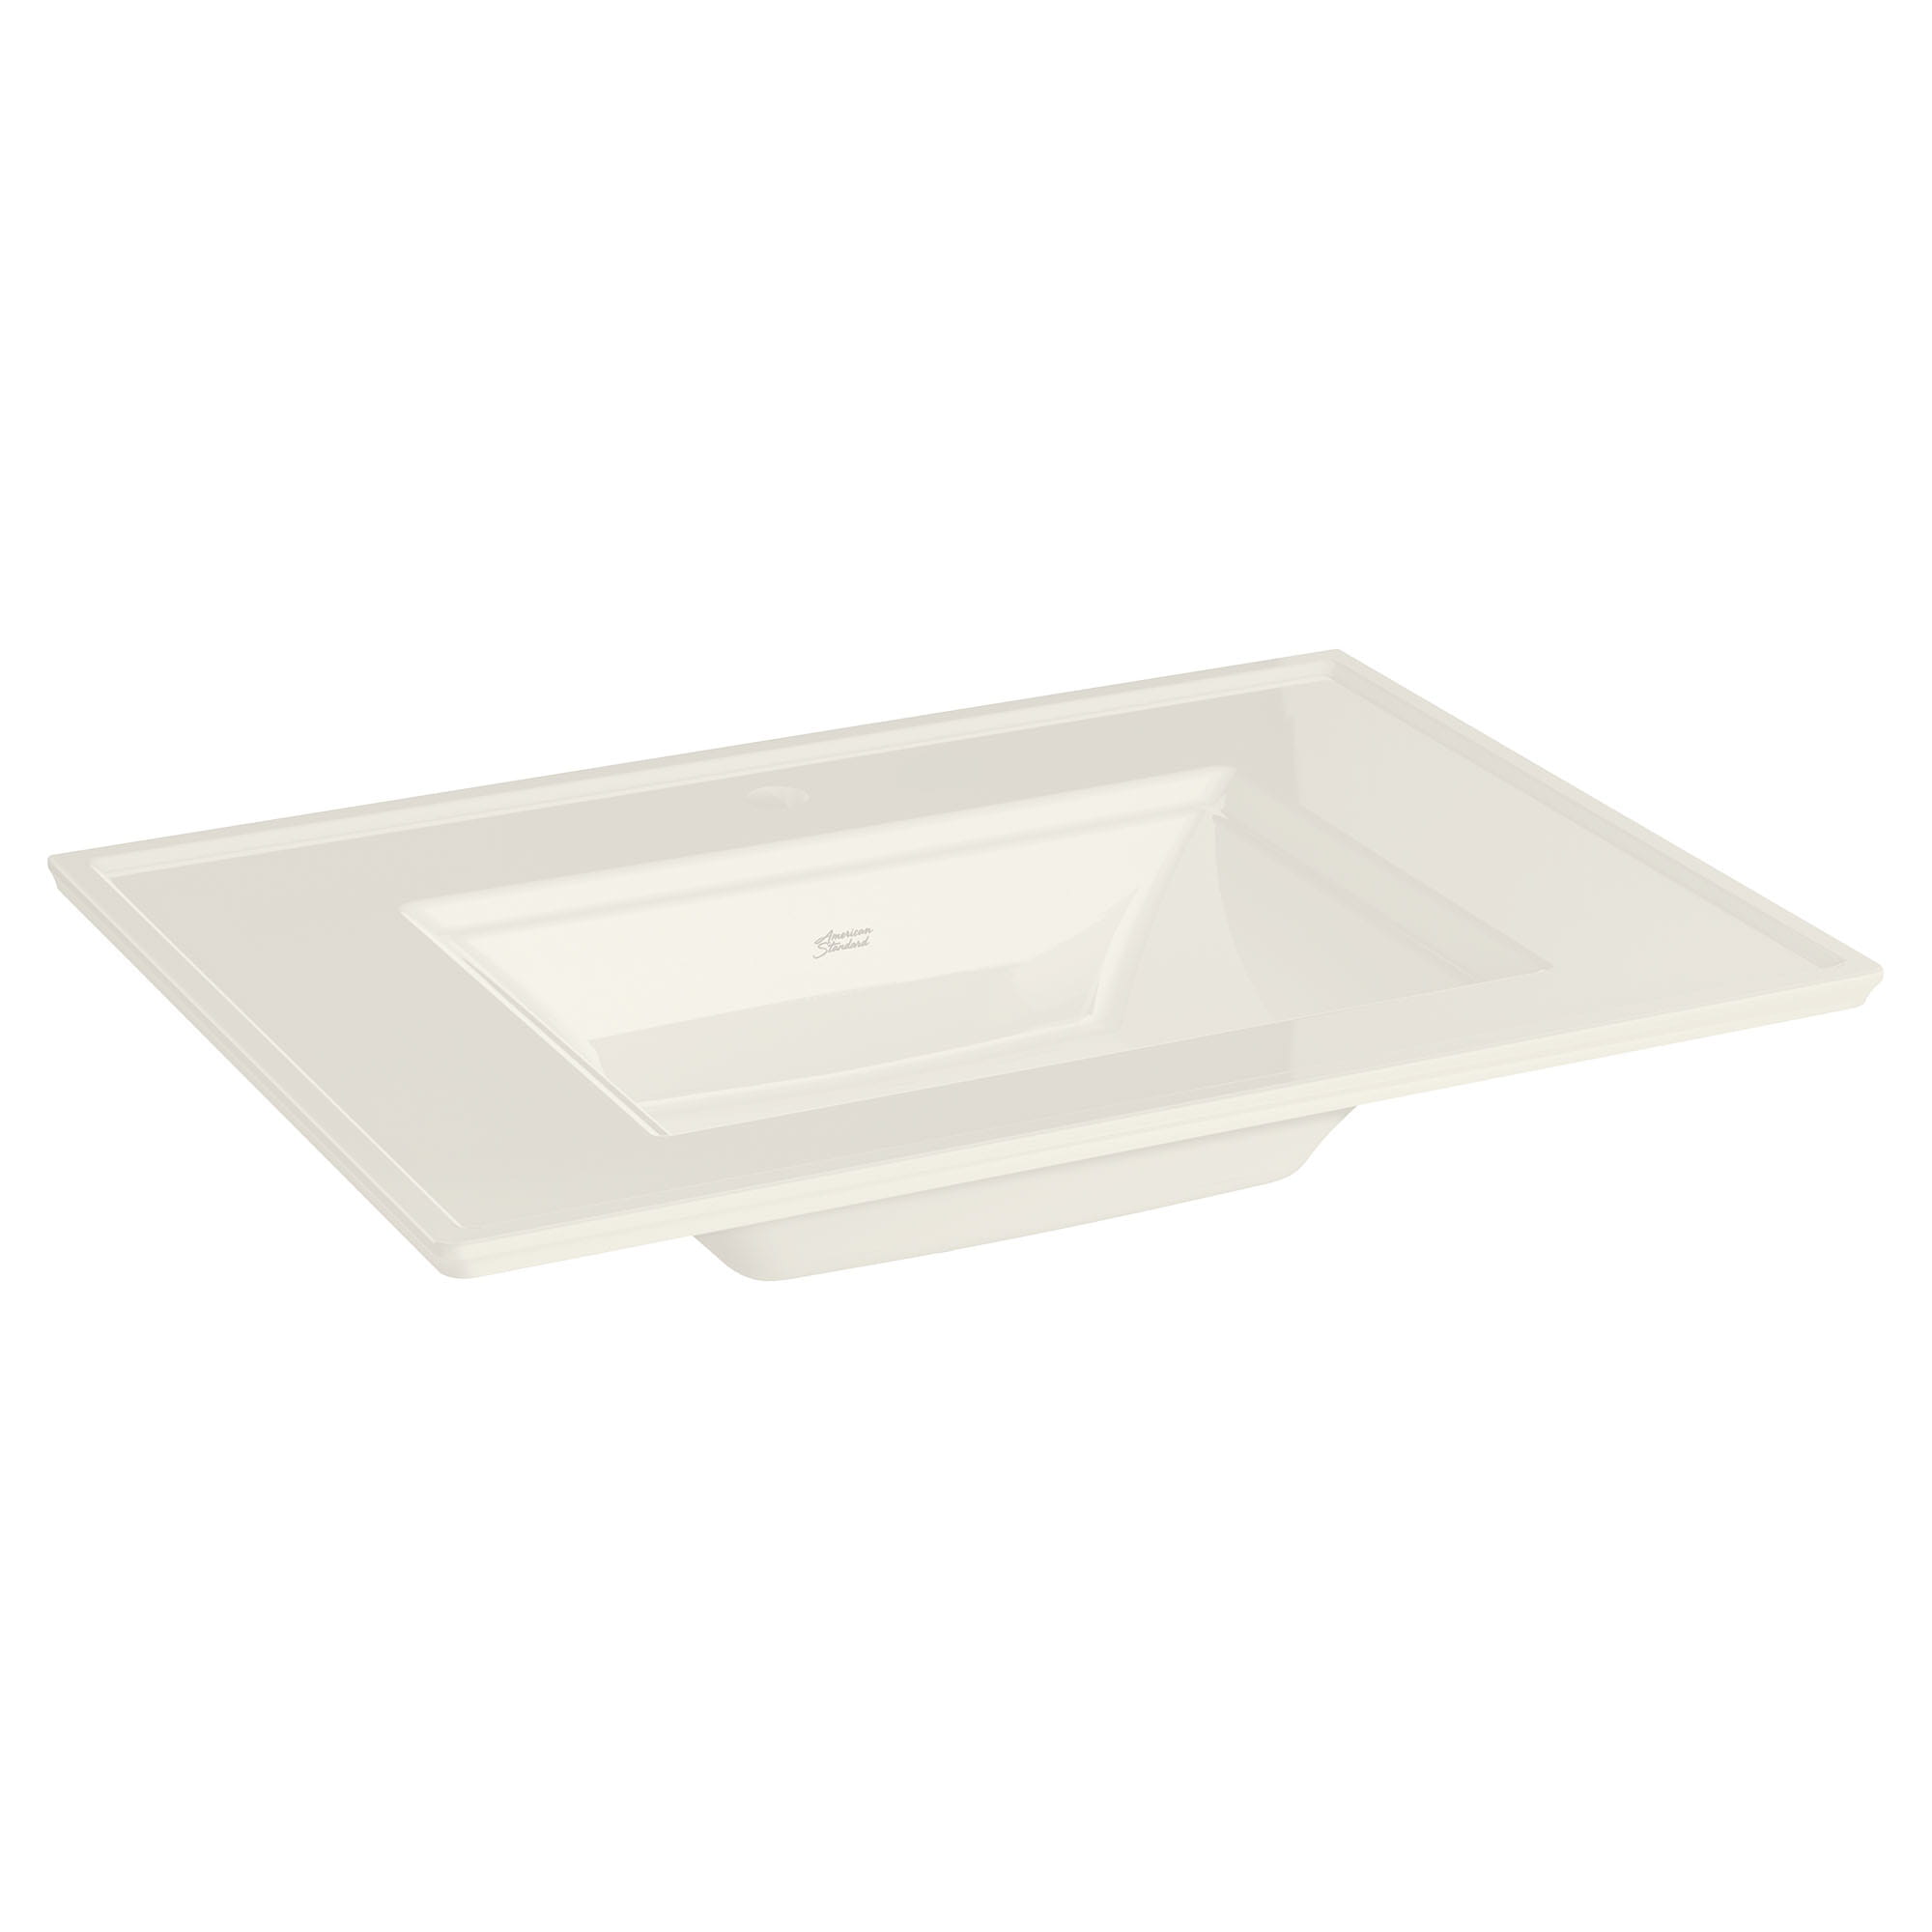 Town Square® S Console Vanity Sink Top Center Hole Only